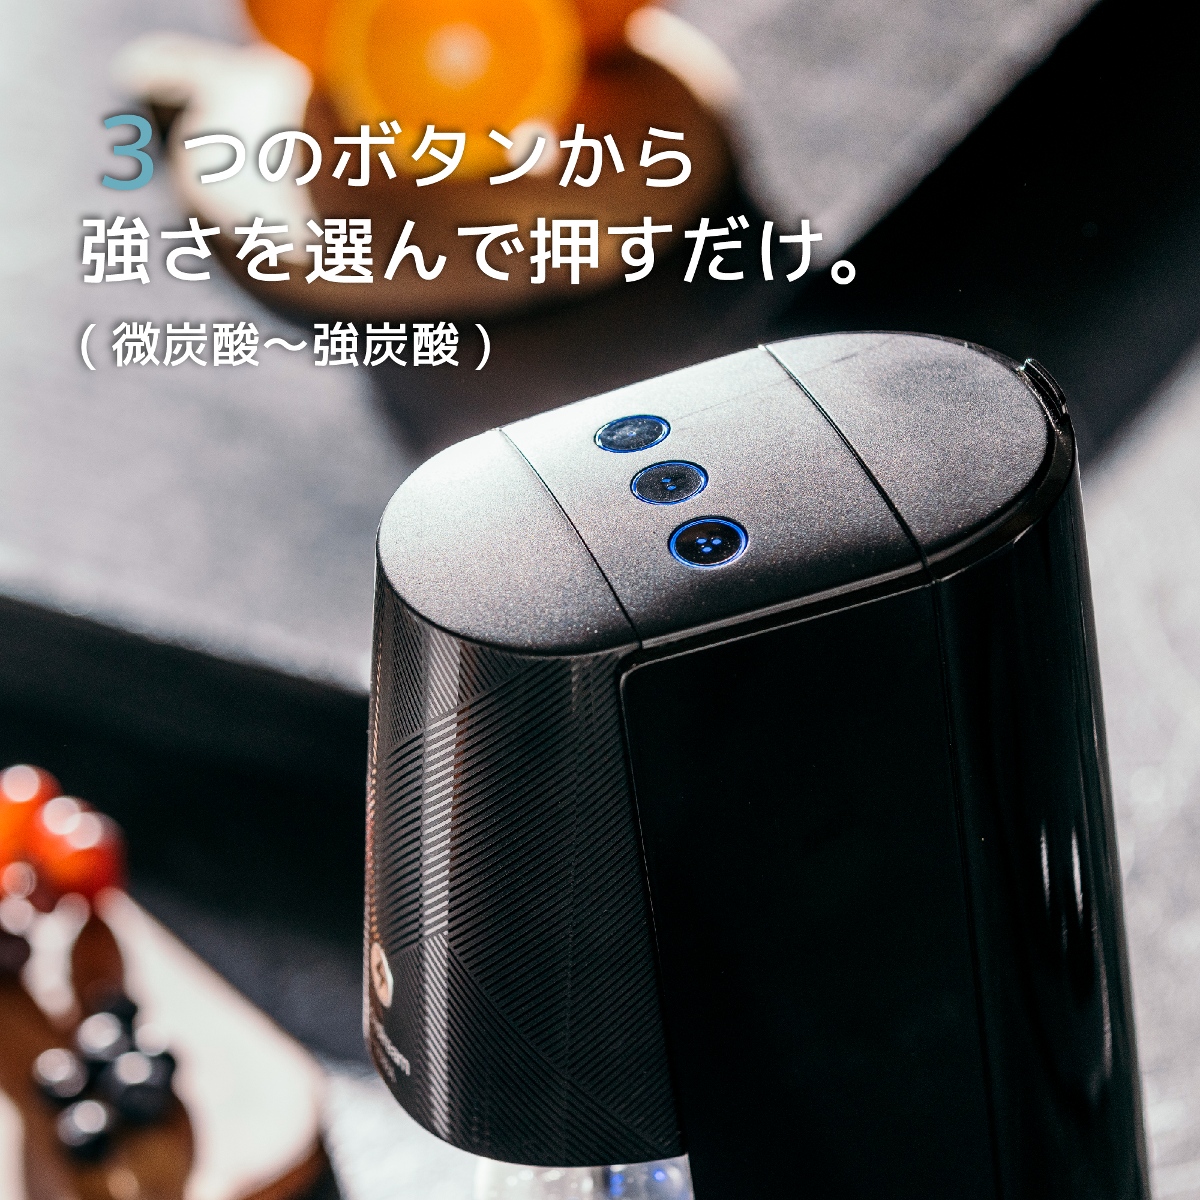  soda Stream E-TERRA(E- tera ) starter kit [ official limitation bottle attaching ]< carbonated water Manufacturers >